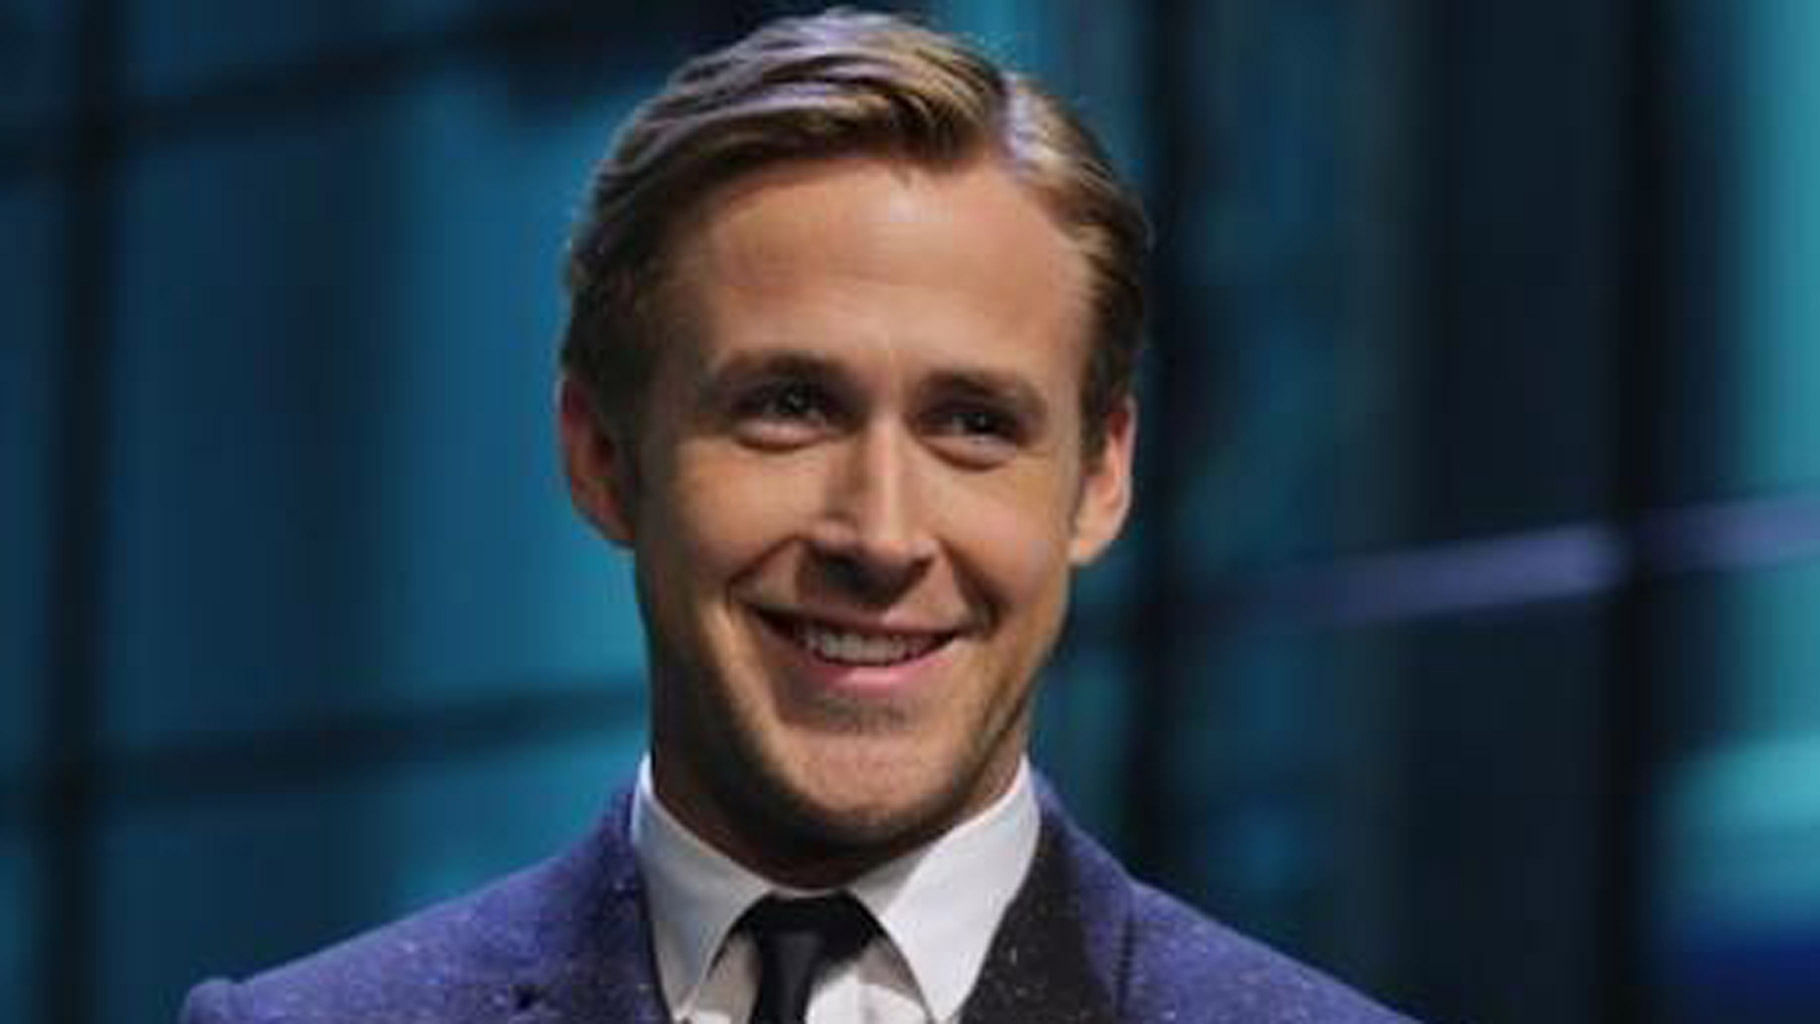 Ryan Gosling will be one of the presenters at this year’s Oscars. (Photo: Facebook/ <a href="https://www.facebook.com/ryangoslingofficialpage/photos/pb.358409924289753.-2207520000.1454059565./390988894365189/?type=3&amp;theater">Ryan Gosling</a>)